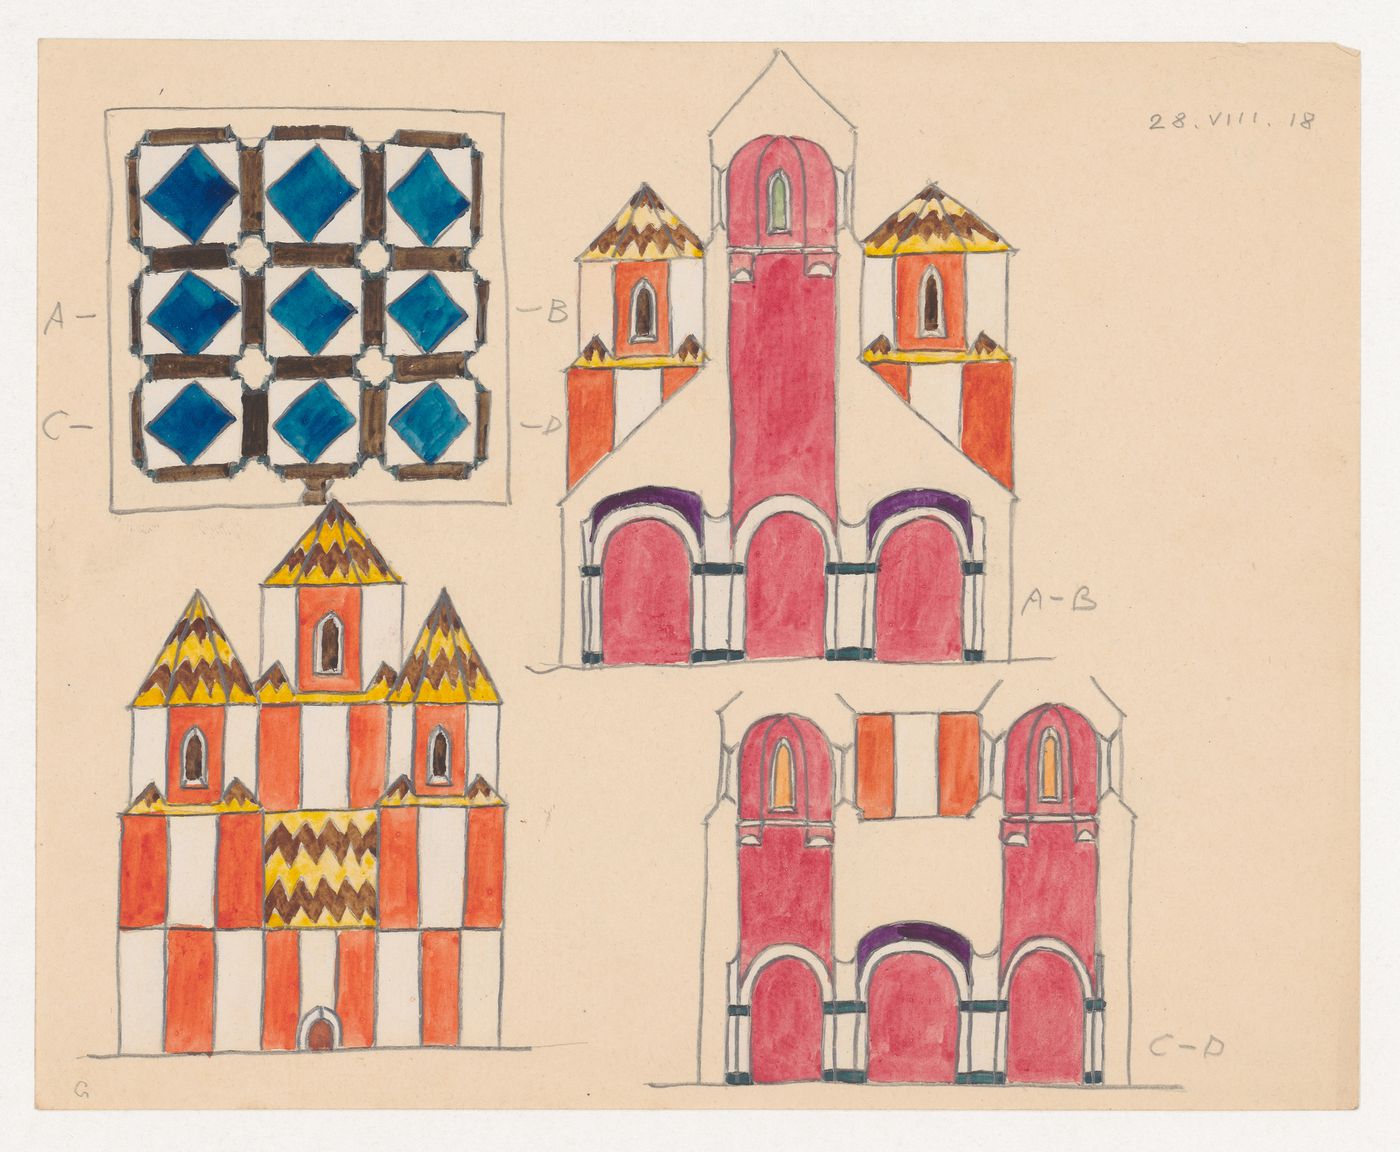 Plan, elevation, and section for a multi-coloured church